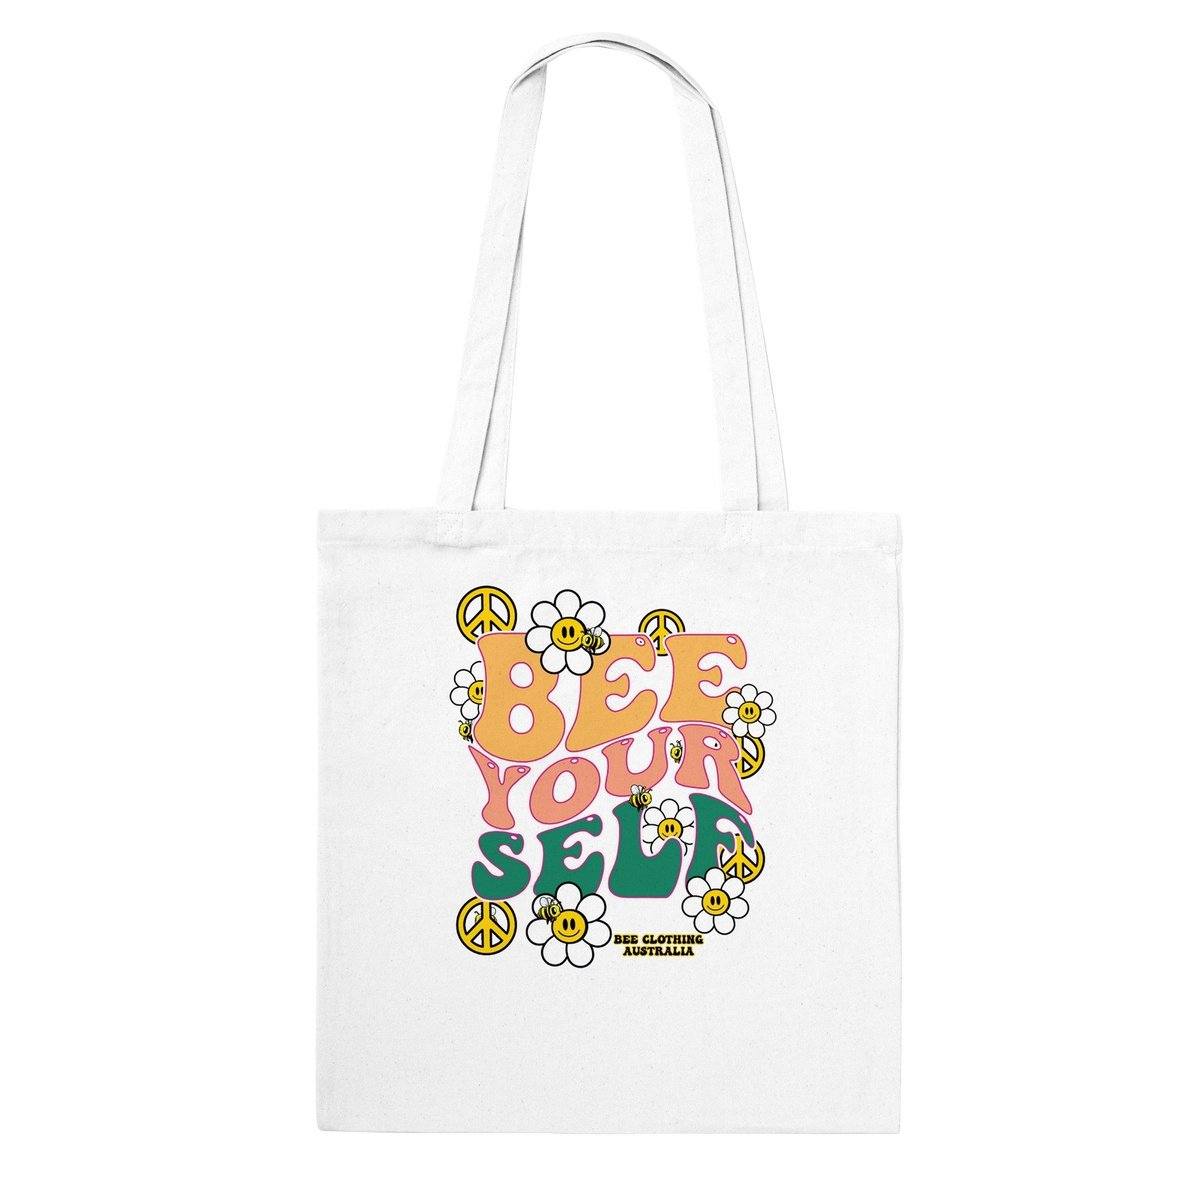 Bee Yourself groovy  - Classic Tote Bag Graphic Tee Australia Online White